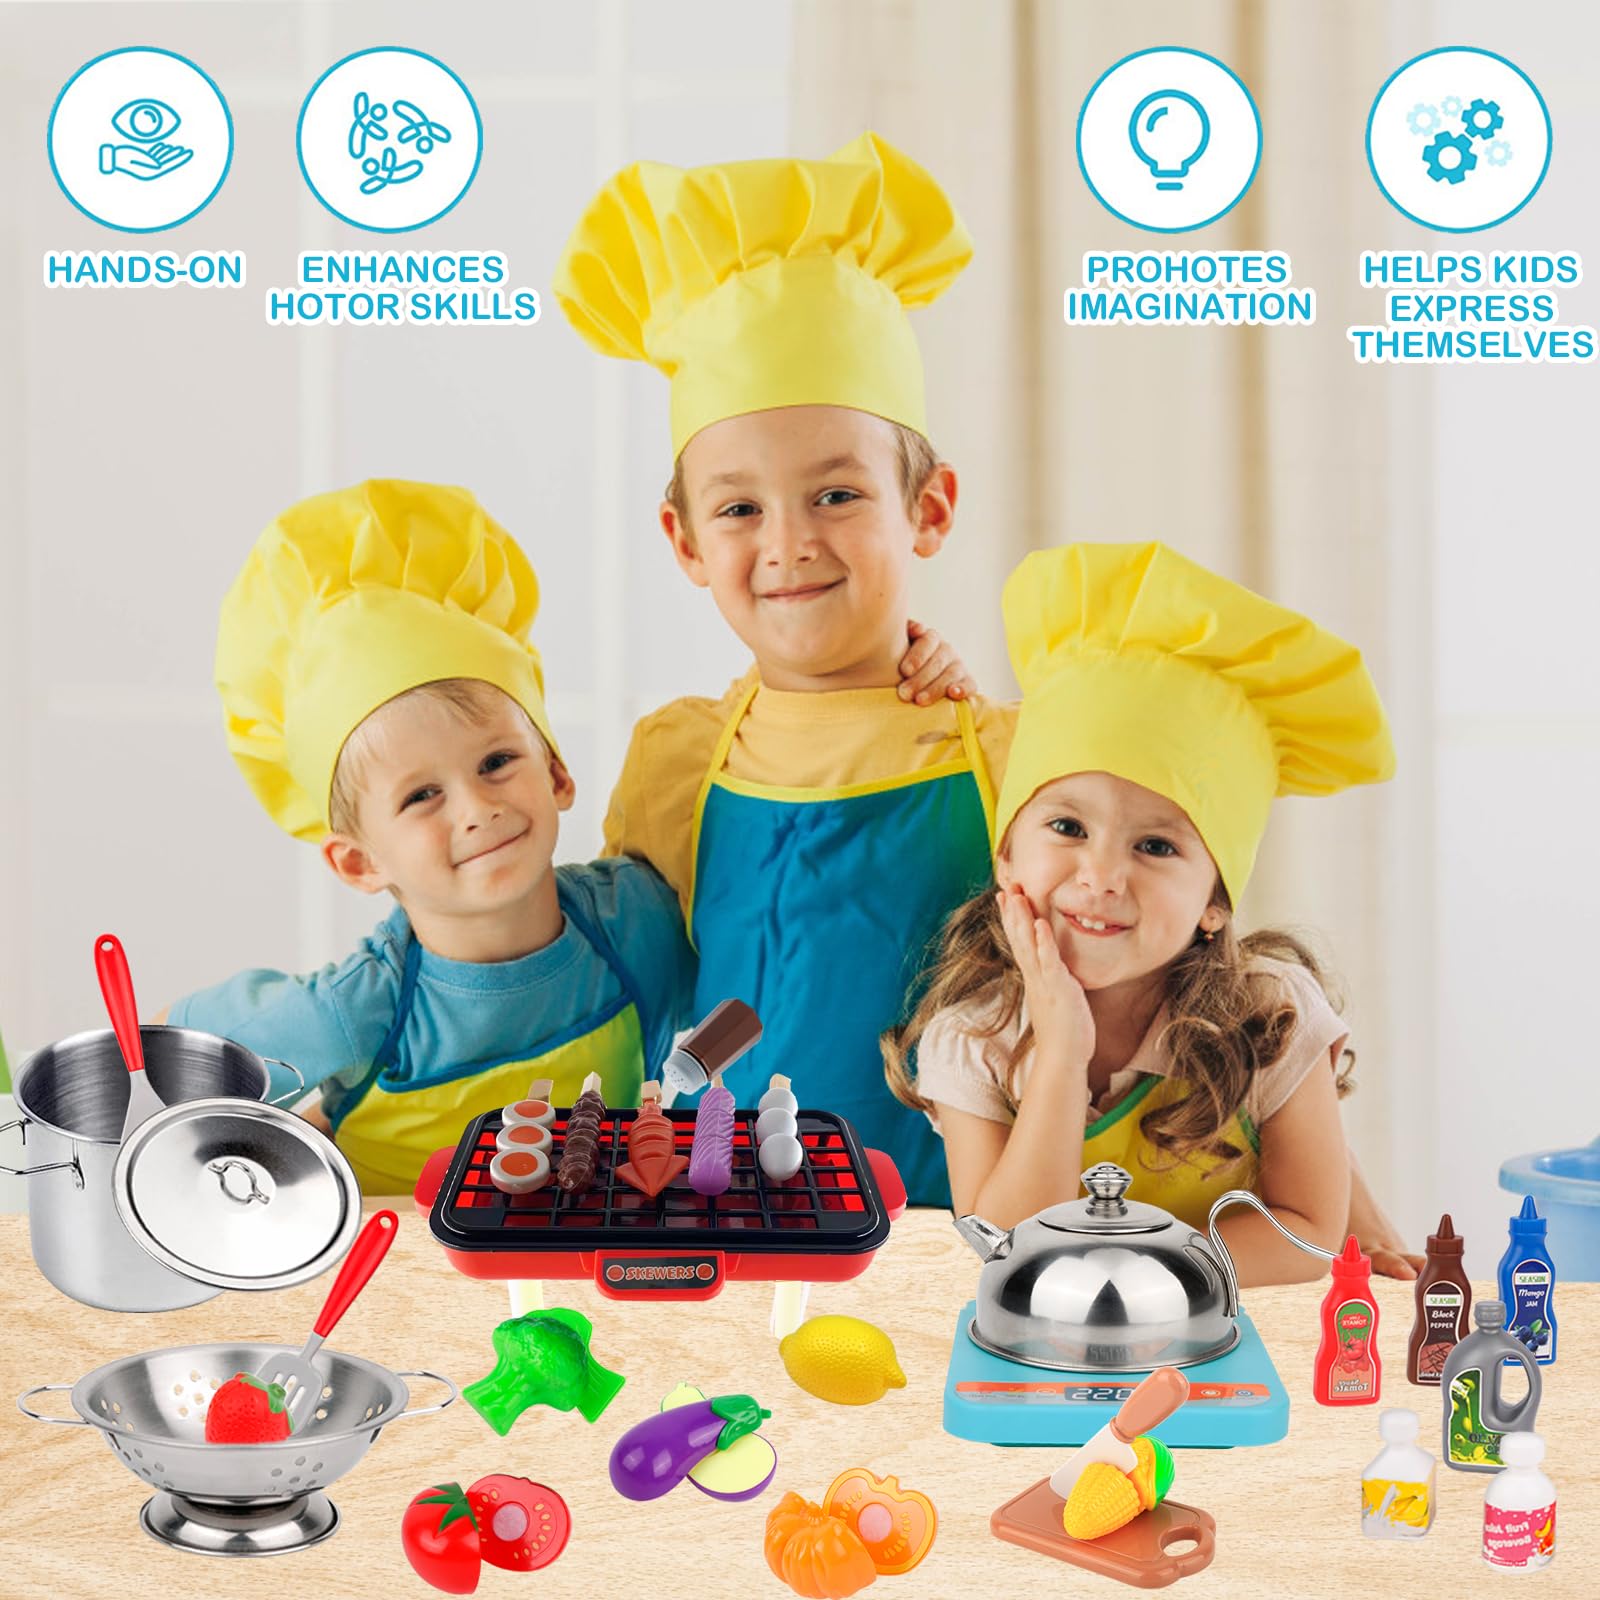 Holycco Play Kitchen Accessories, Kitchen Set for Kids with Play Pots and Pans, BBQ Camping Kitchen Playset, Pretend Kids Kitchen Accessories Toy Gifts for Girls, Grill Playset Toys for Boys Girls